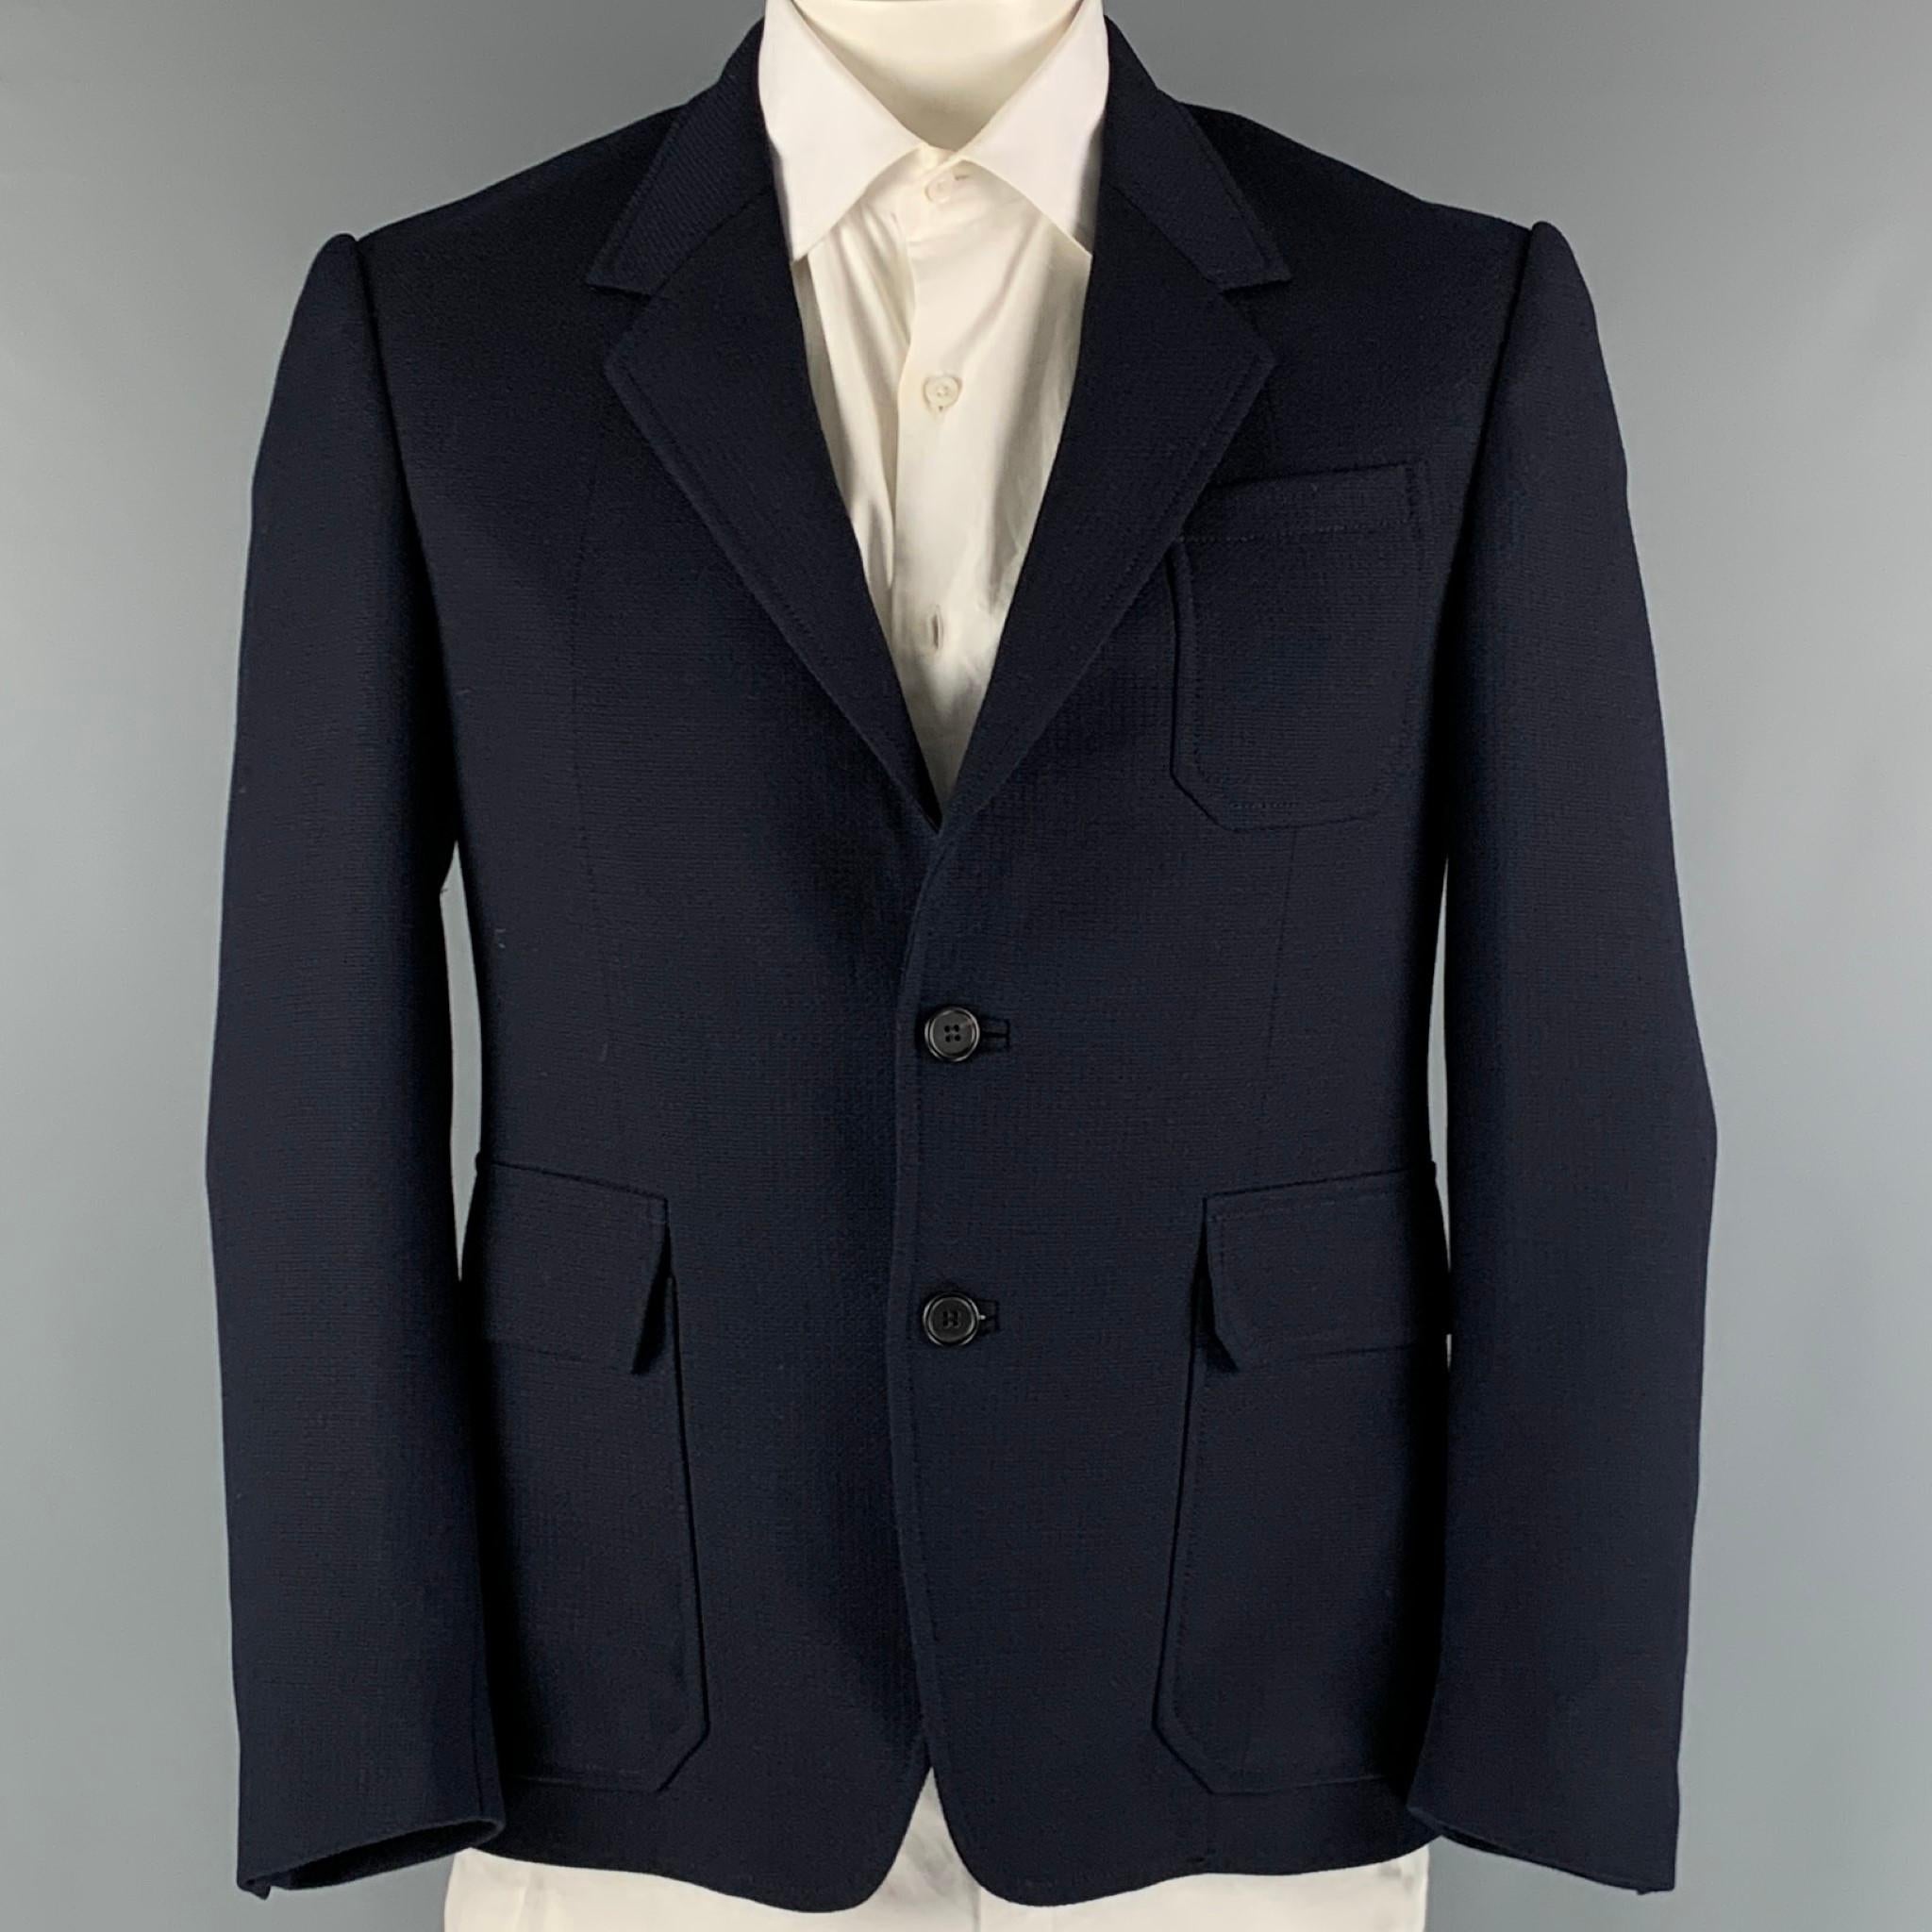 PRADA sport coat comes in a navy wool and mohair woven material with no lining featuring a notch lapel, patch pockets, single back vent, and a double button closure.

Excellent Pre-Owned Condition.
Marked: 52 S

Measurements:

Shoulder: 18